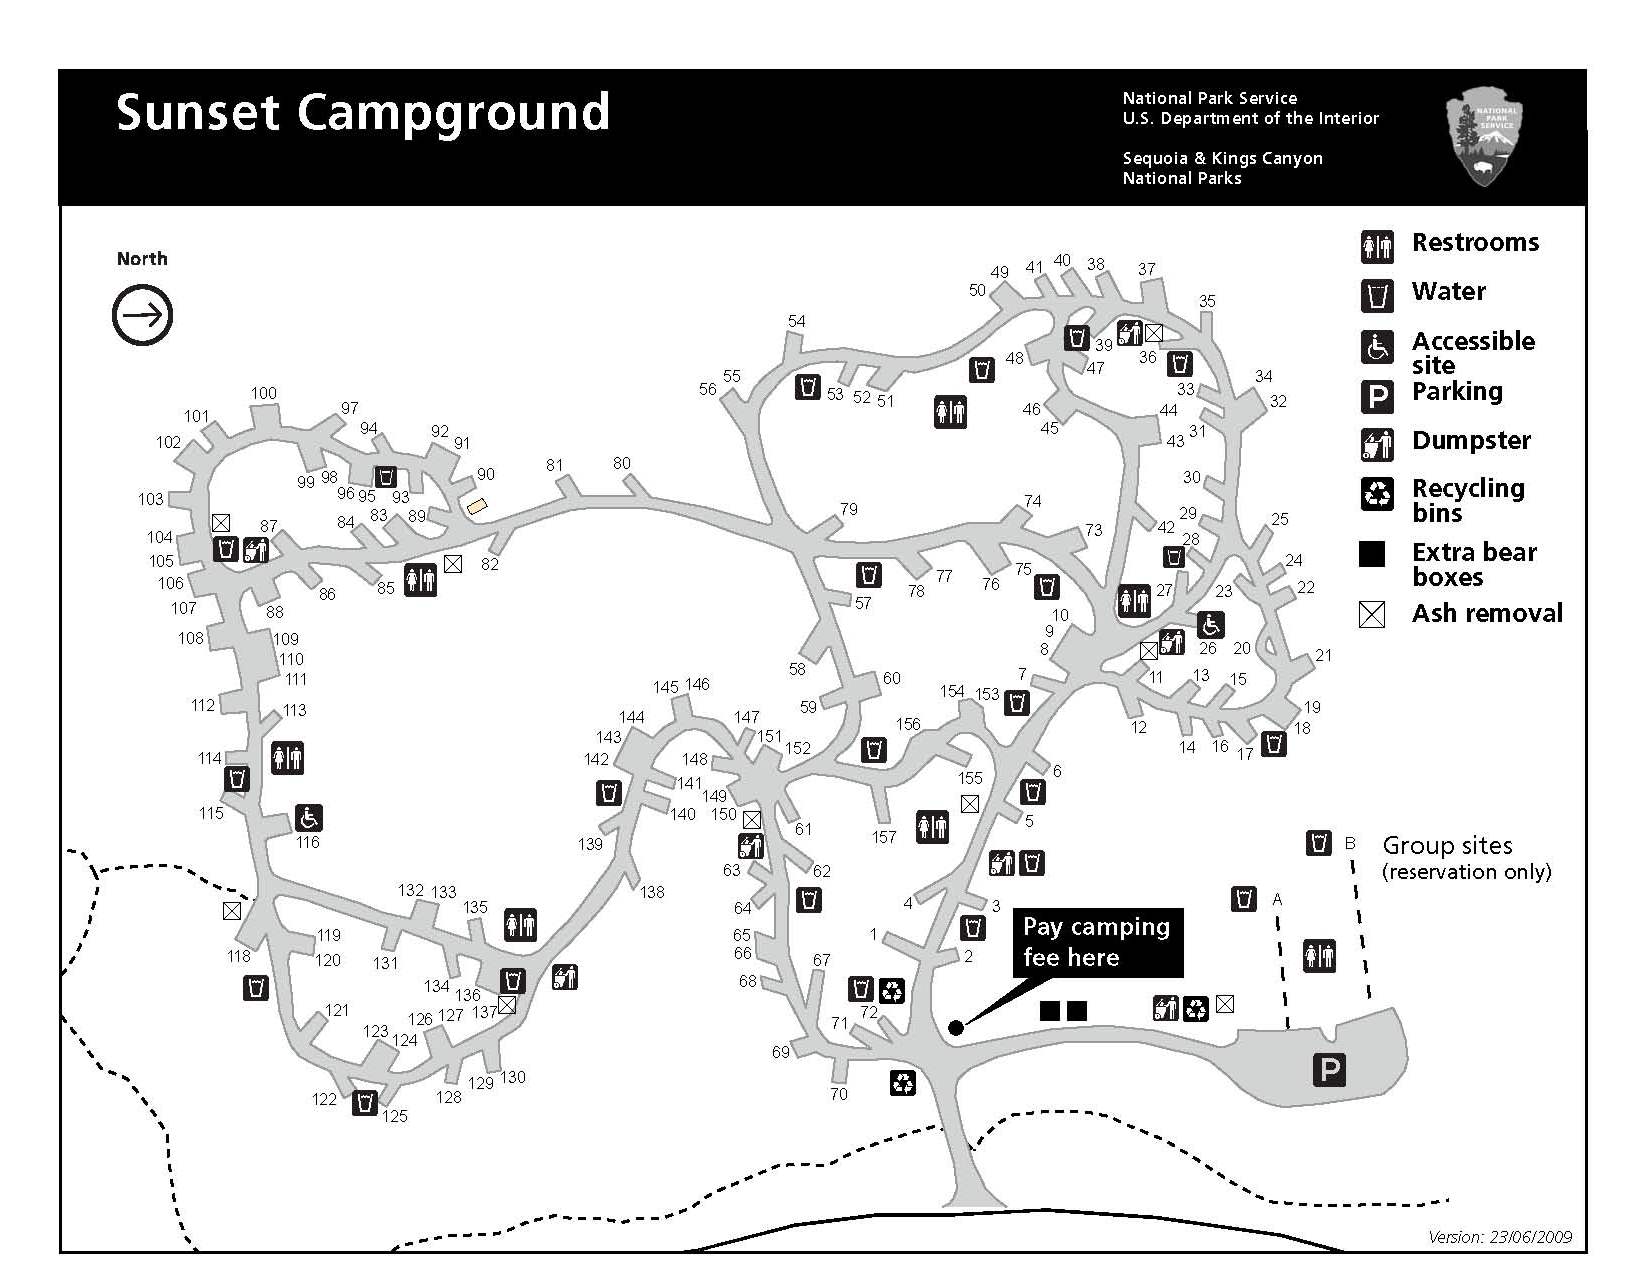 Sunset Campground - Sequoia & Kings Canyon National Parks (U.S